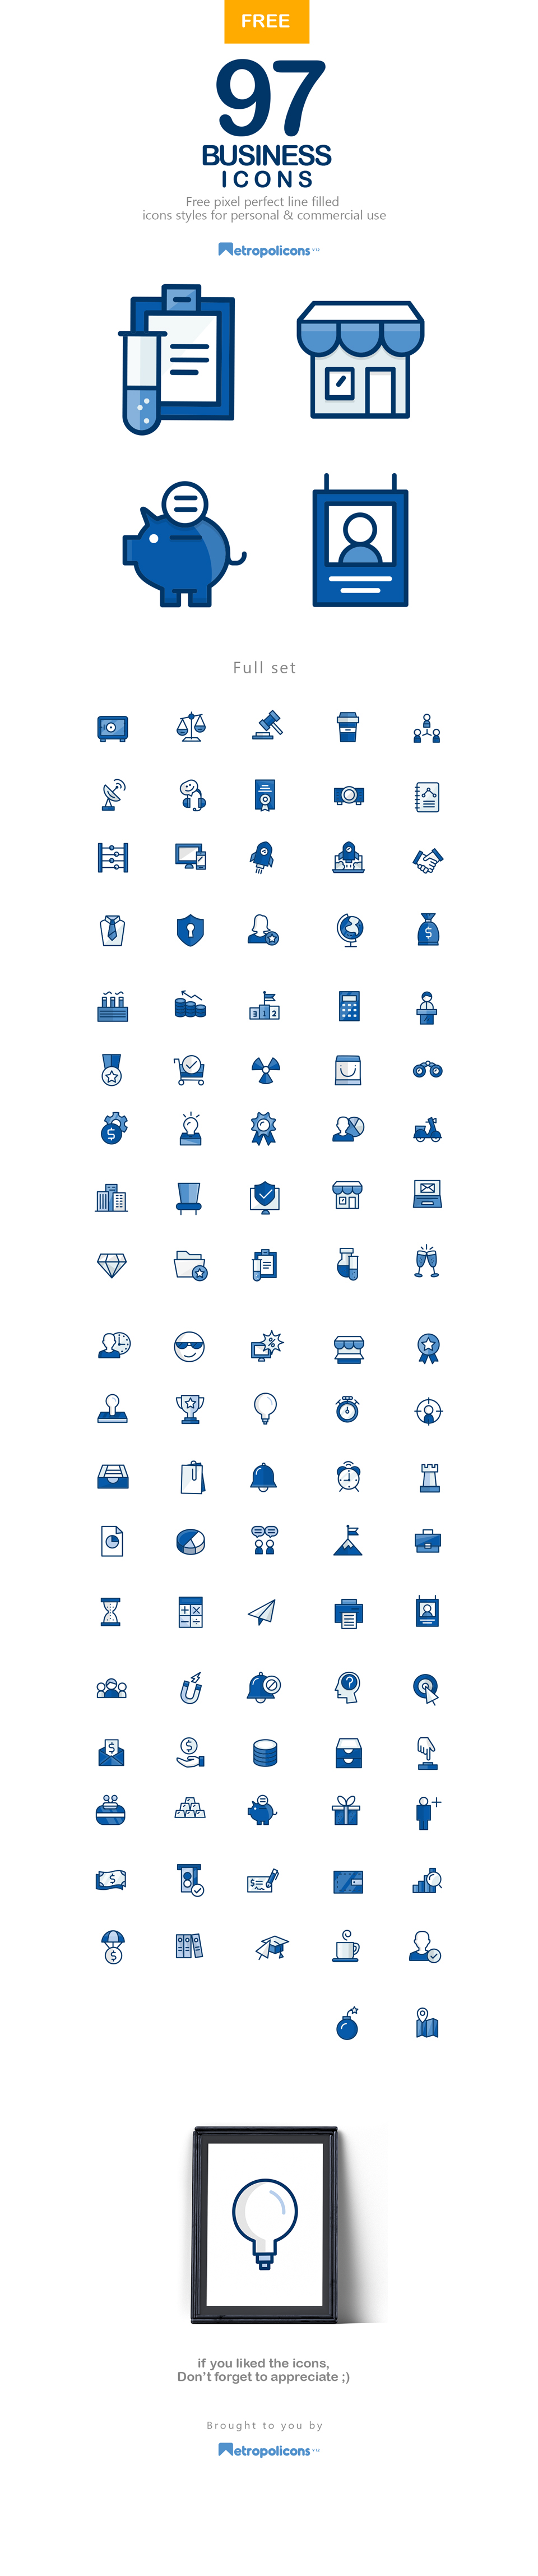 free icons line filled business metropolicons